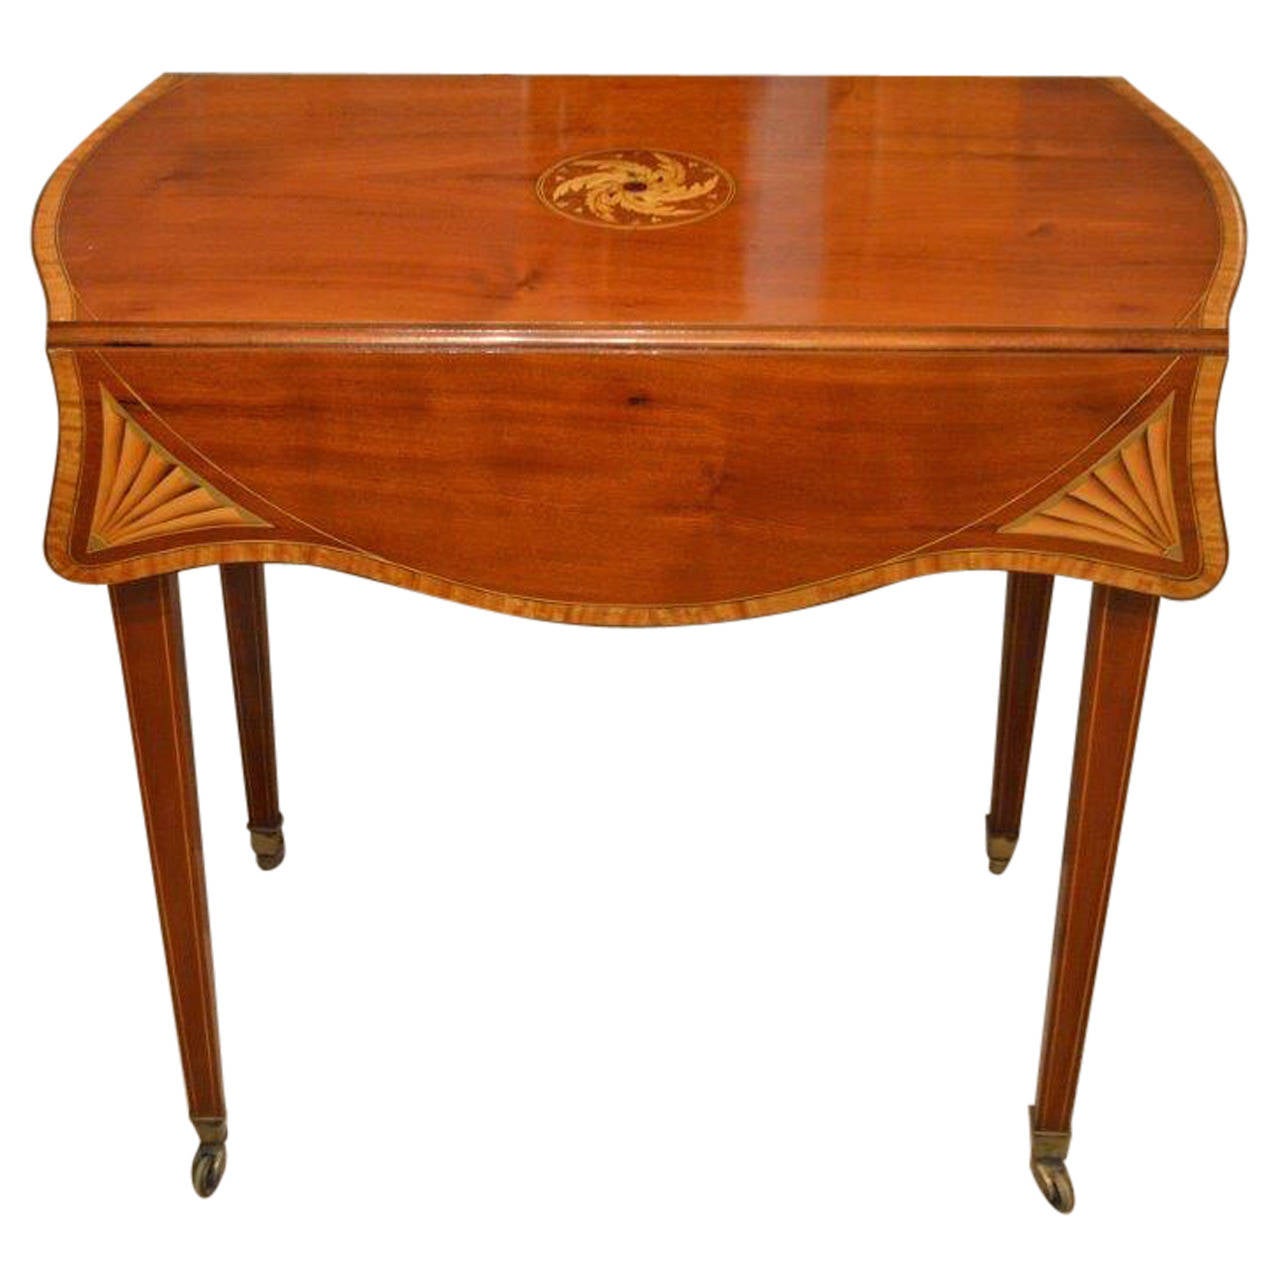 A Mahogany Inlaid Edwardian Period "Butterfly" Pembroke Table For Sale